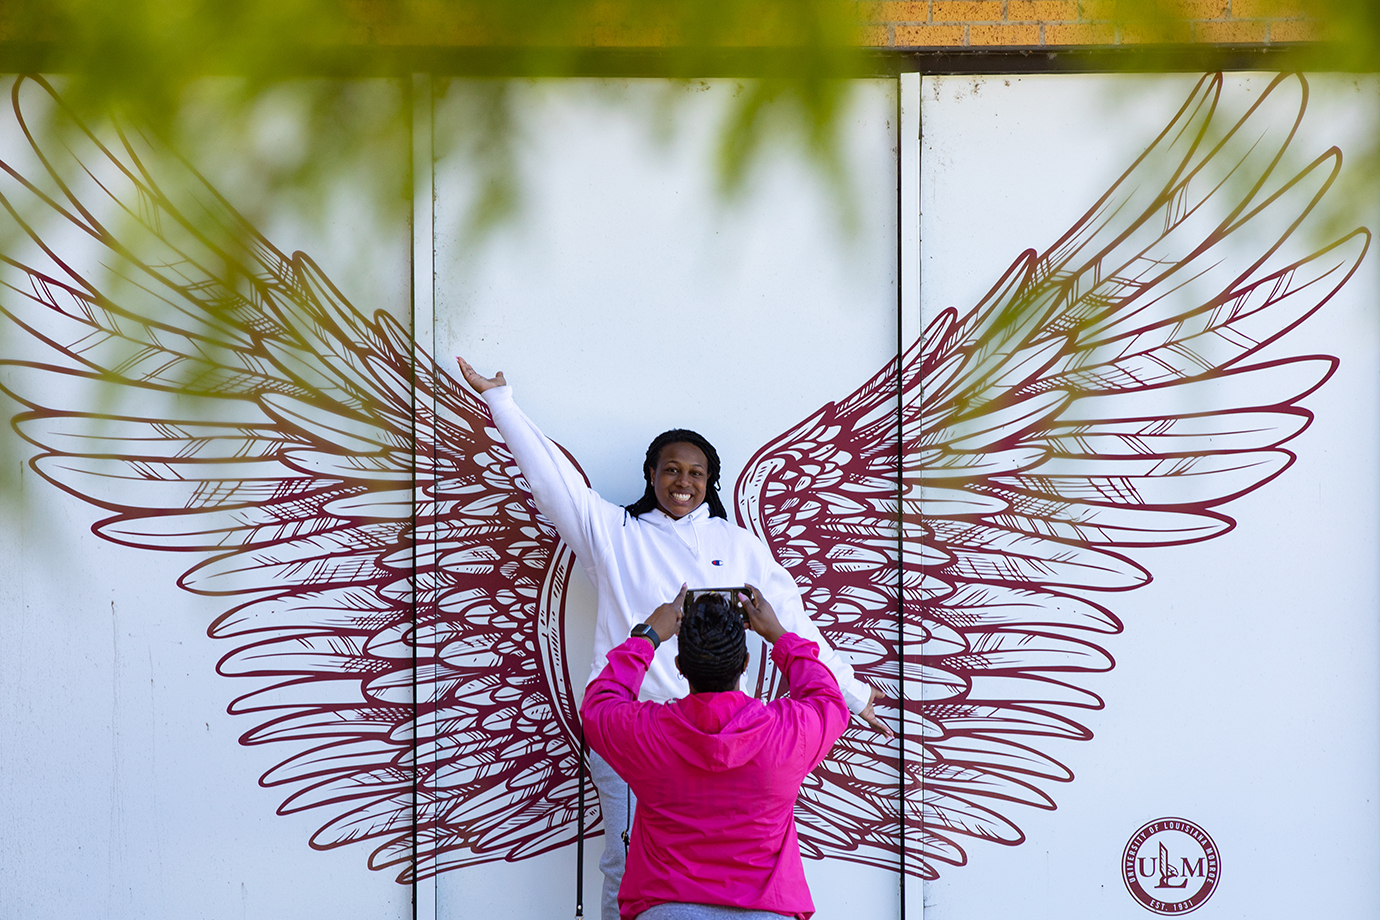 A student stands in front of a mural with wings. A woman takes her picture.